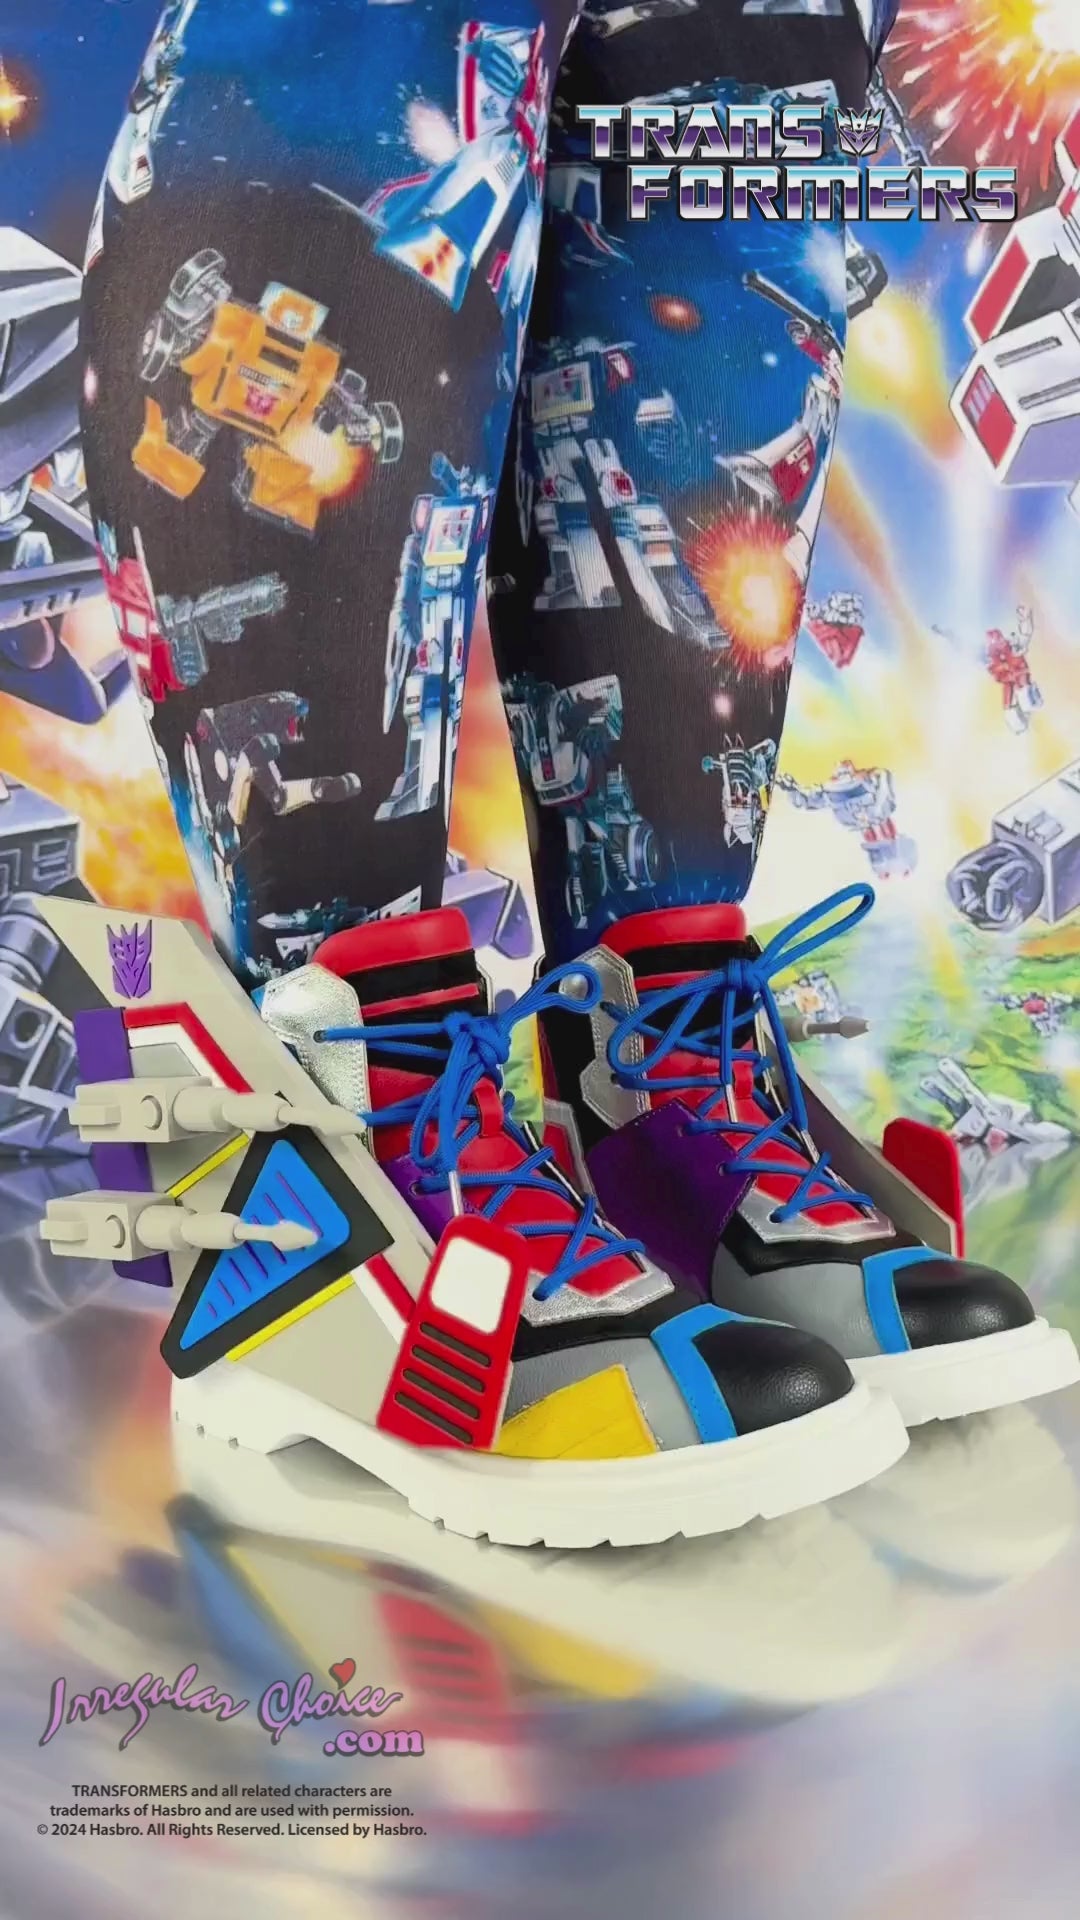 Transformers x Irregular Choice Collection Boots & Bags Revealed